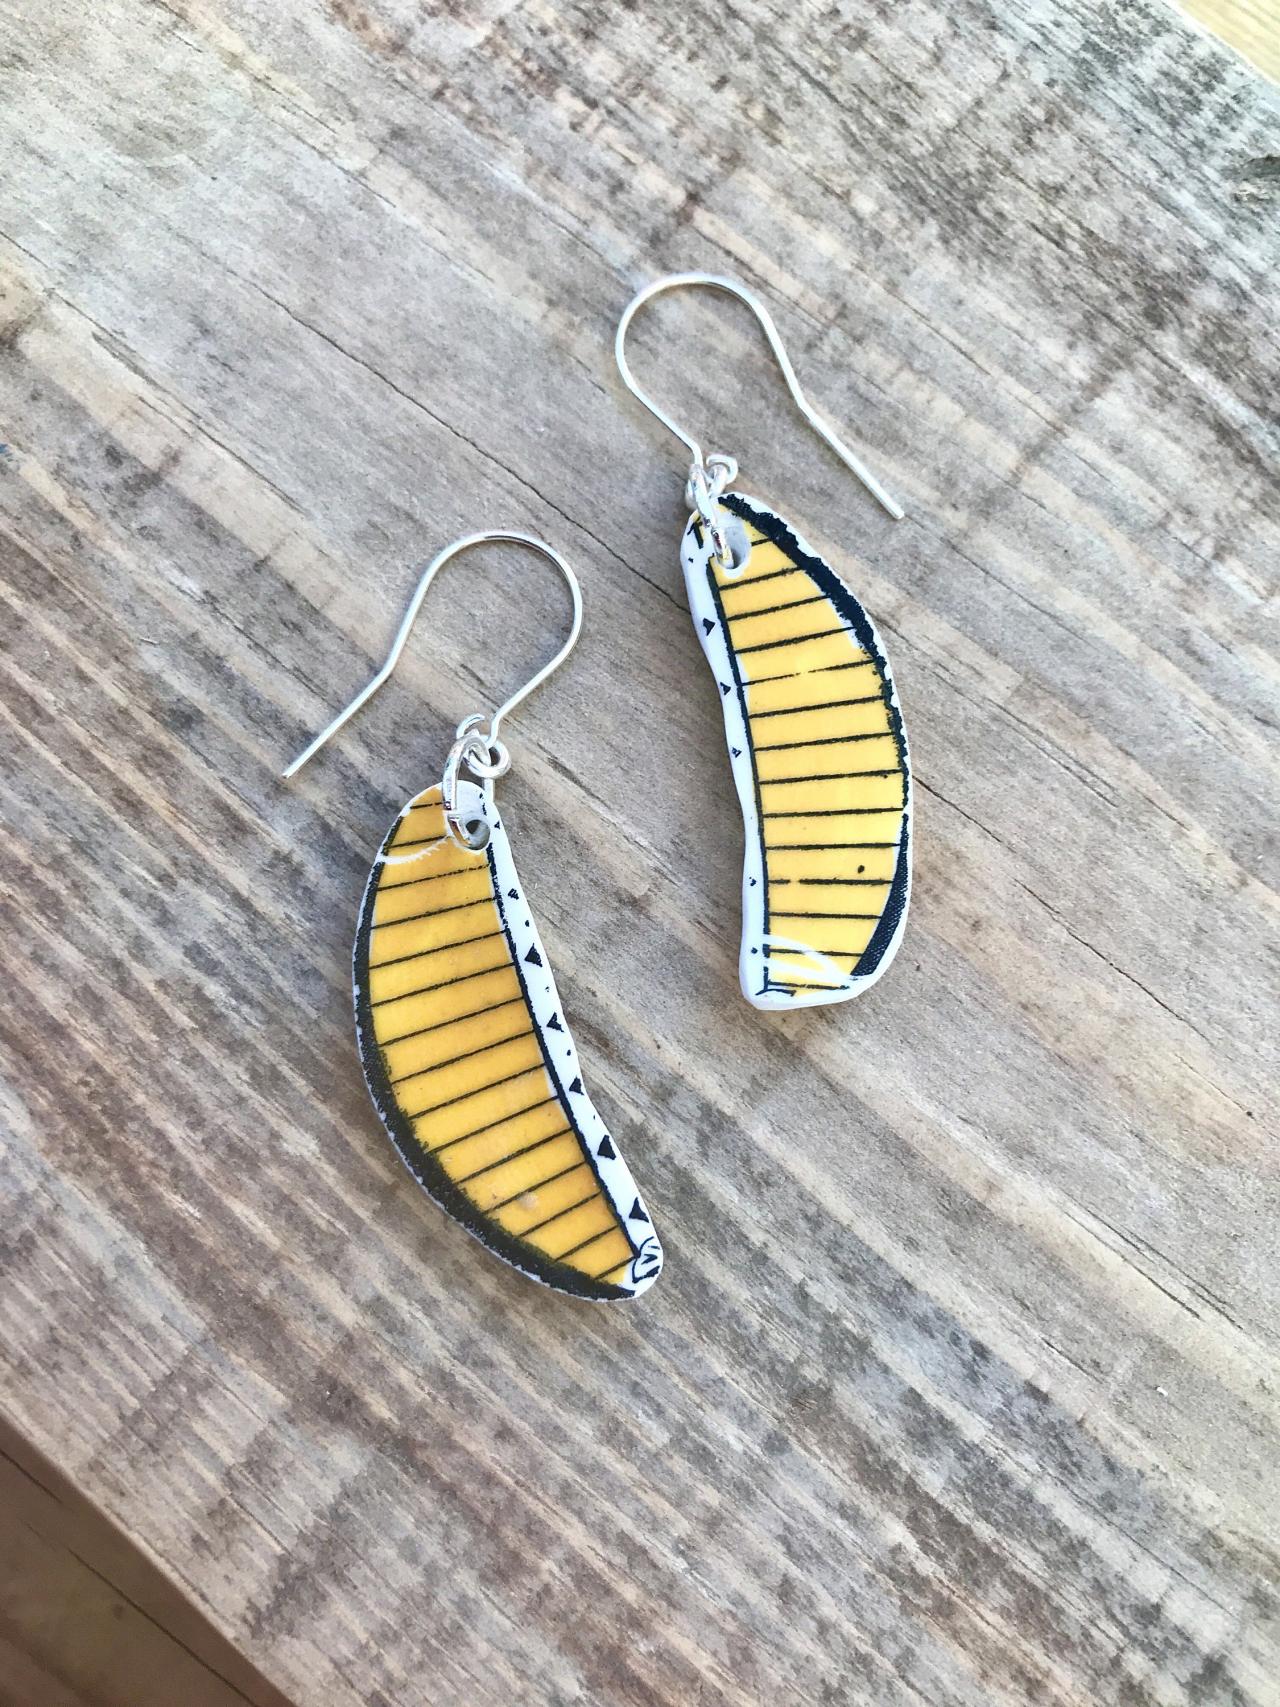 Sweet banana yellow vintage recycled broken China earrings with sterling silver wires.